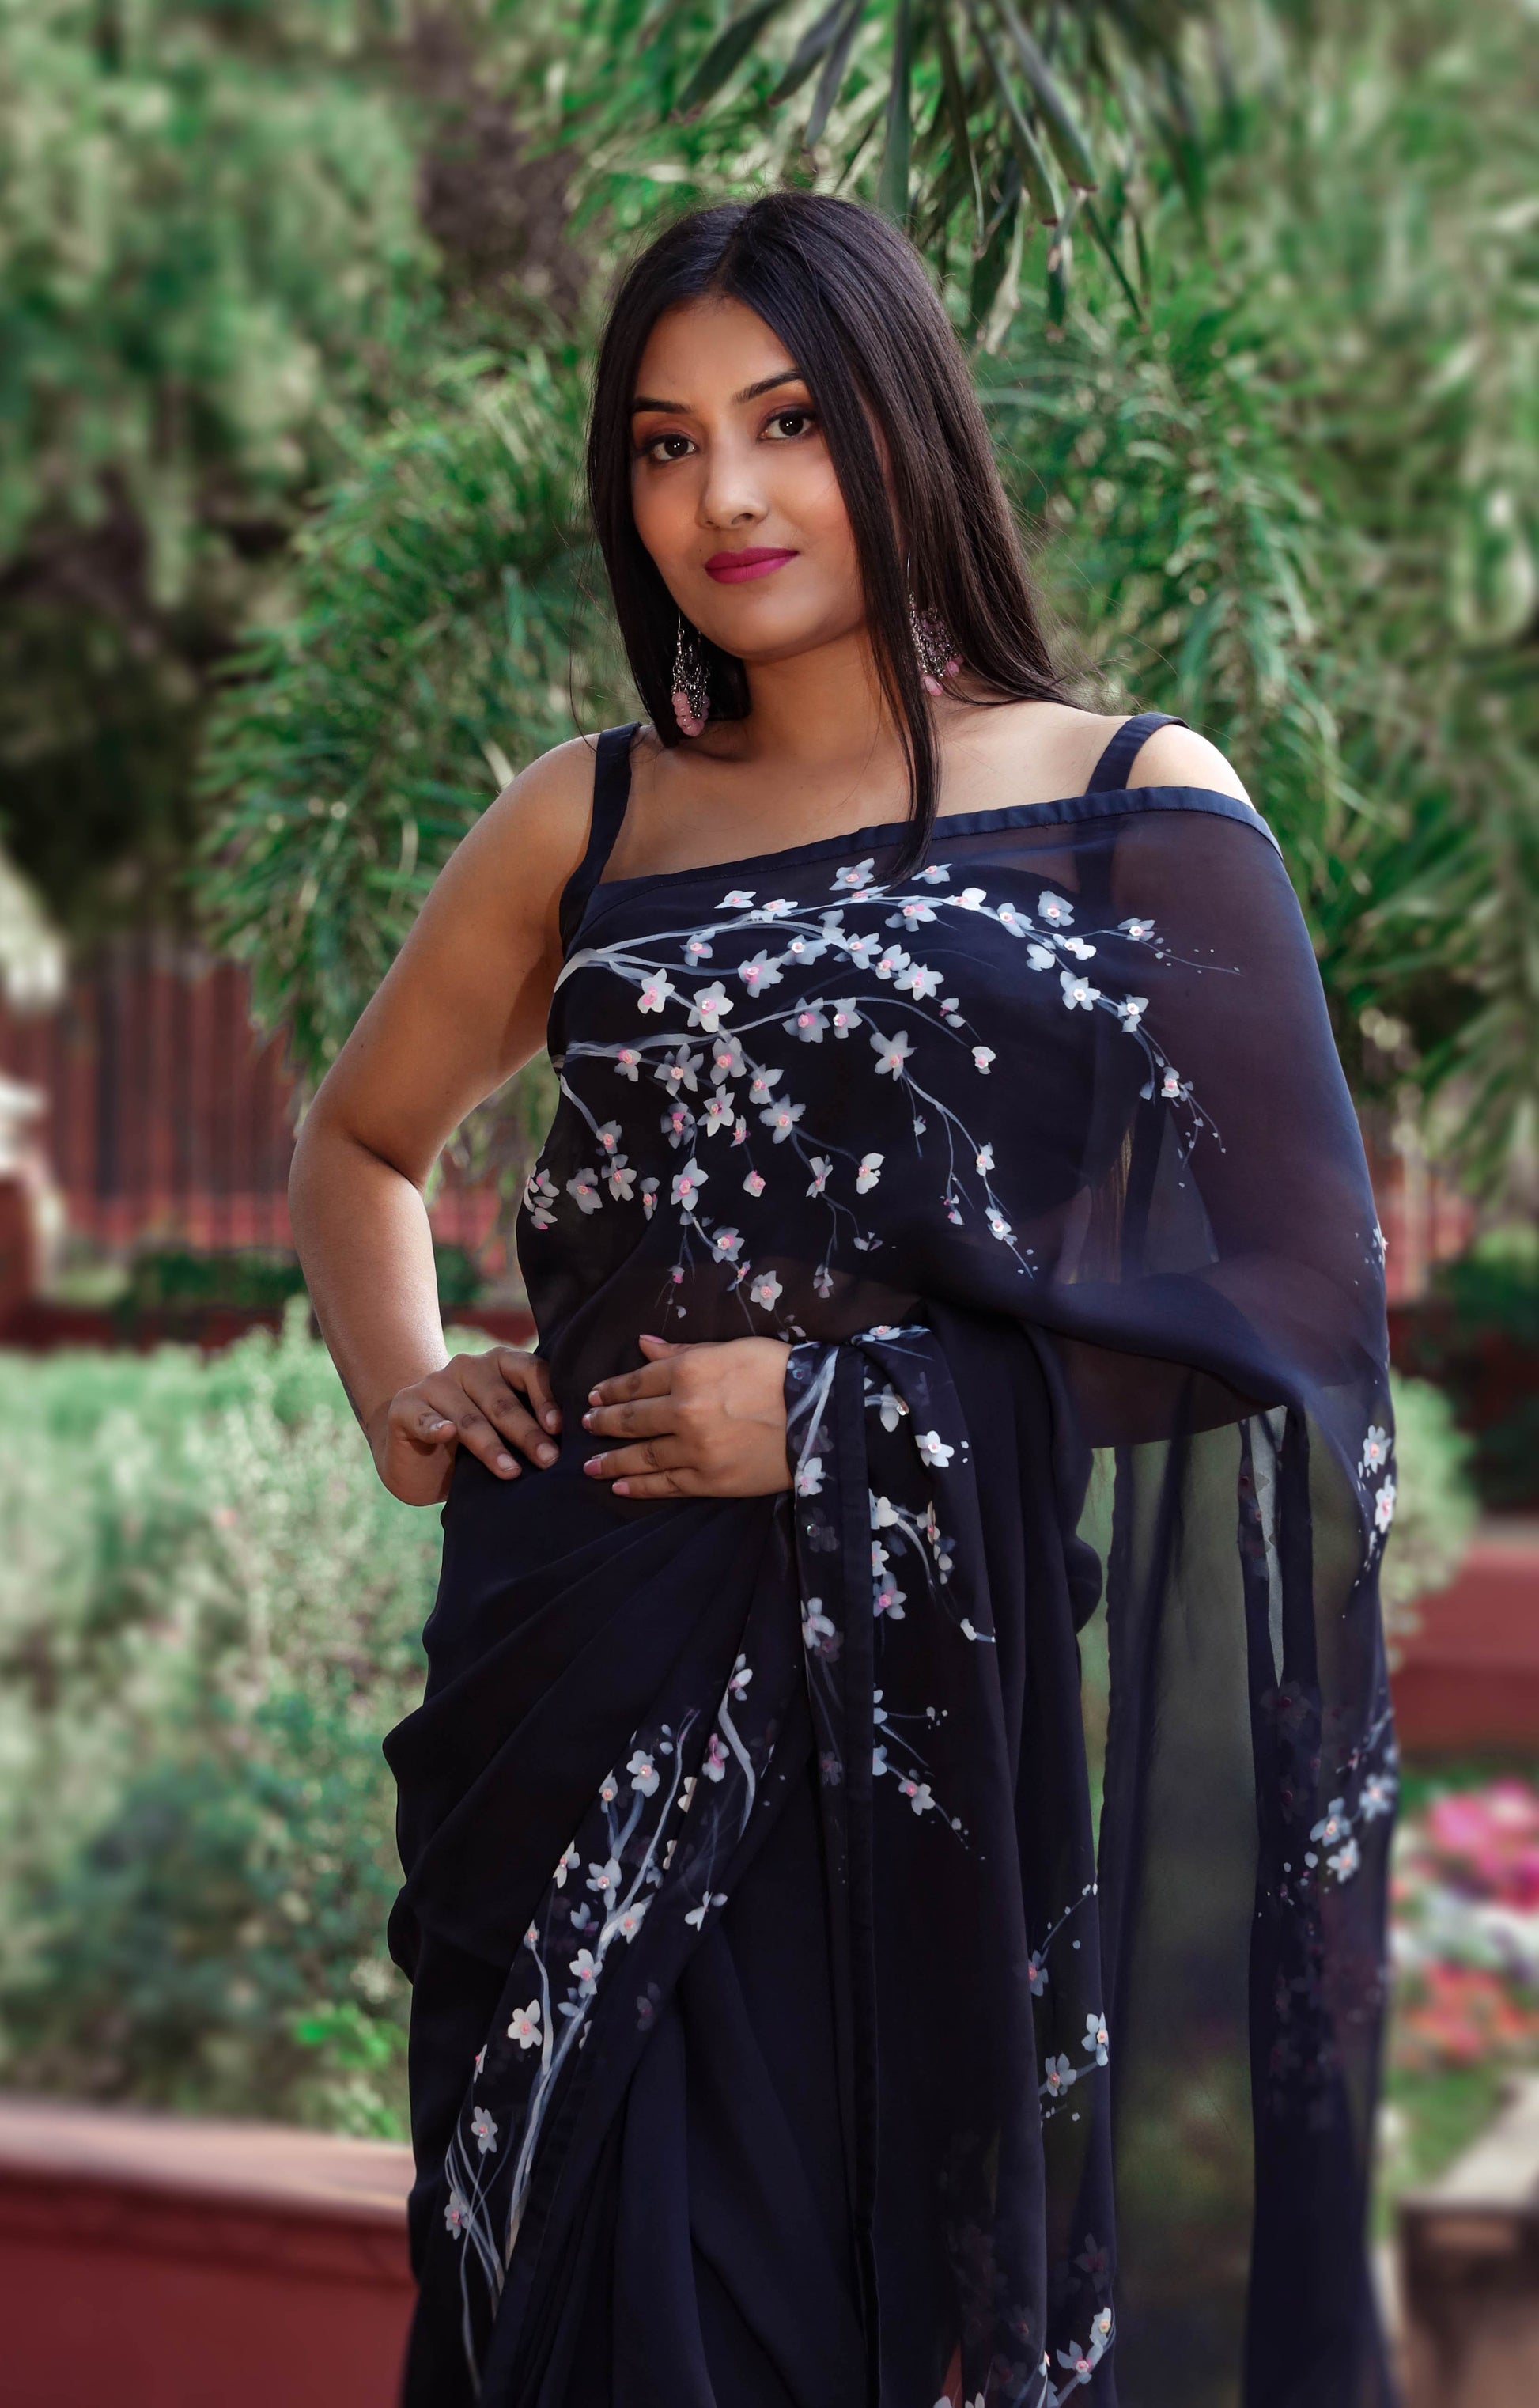 Elegant black organza saree with hand-painted floral design, perfect for parties and special occasions. Features a stunning black saree blouse design and intricate hand painting on saree. This organza saree offers a chic and stylish look, ideal for women who appreciate black saree in silk. A fashionable choice for black saree party wear